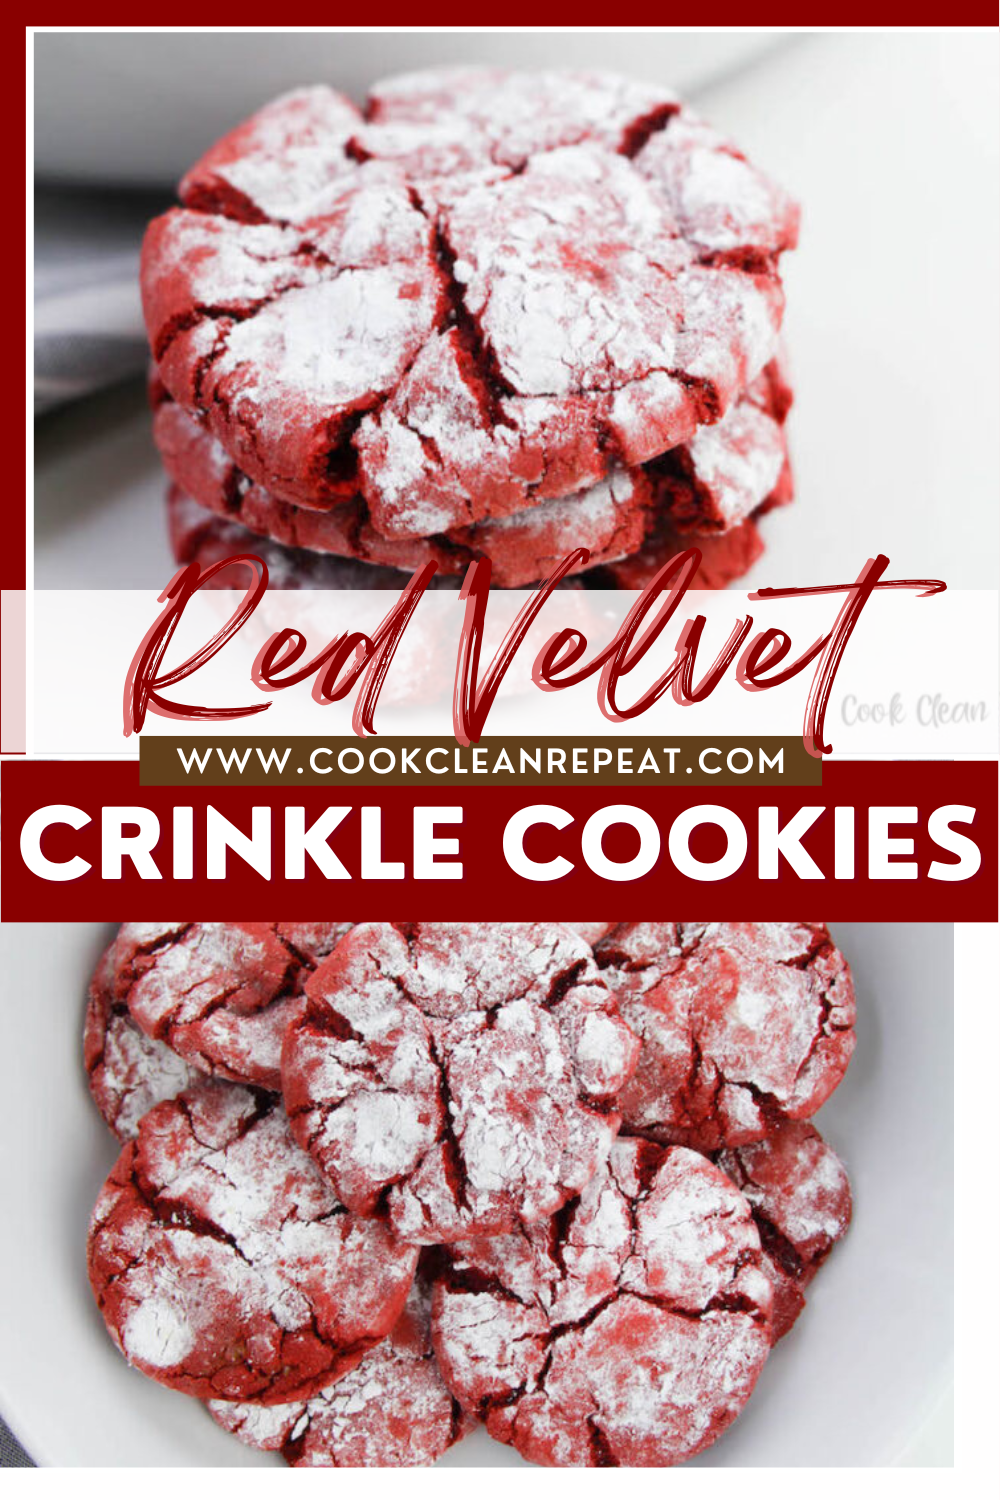 Pin showing the title Red Velvet Crinkles Cookies